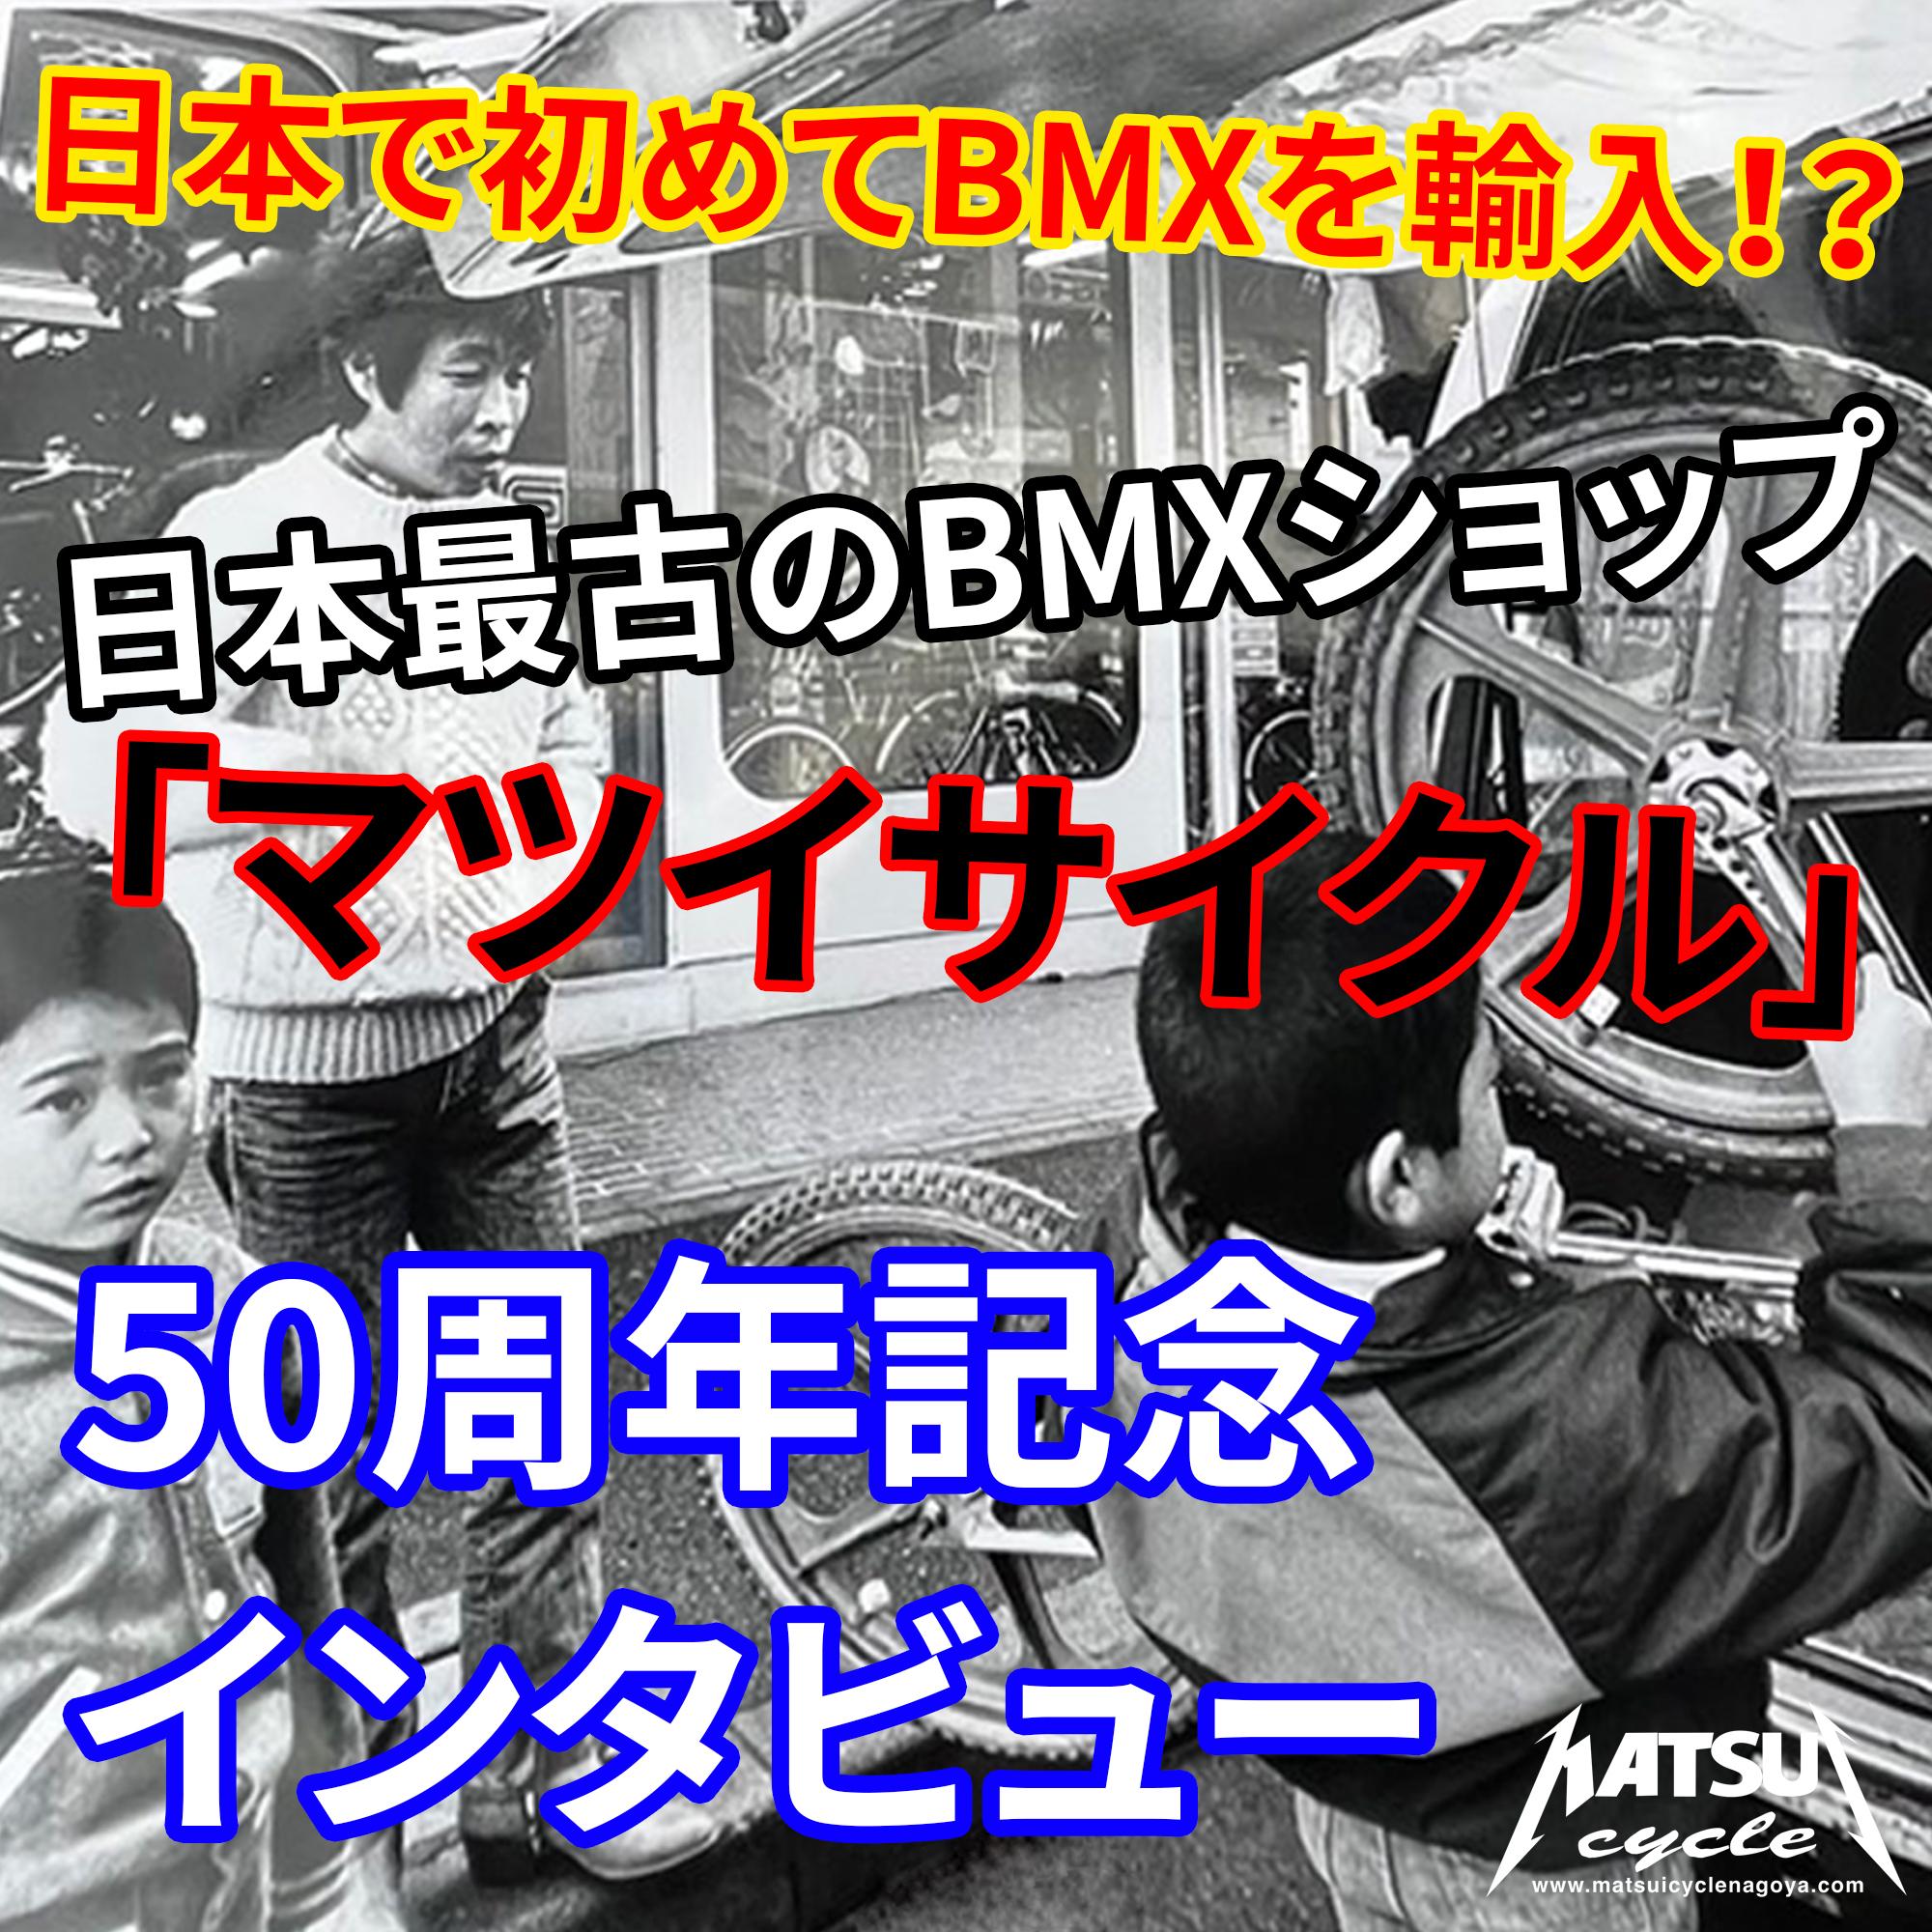 You are currently viewing [VIDEOS]日本で初めてBMXを輸入した自転車屋？！